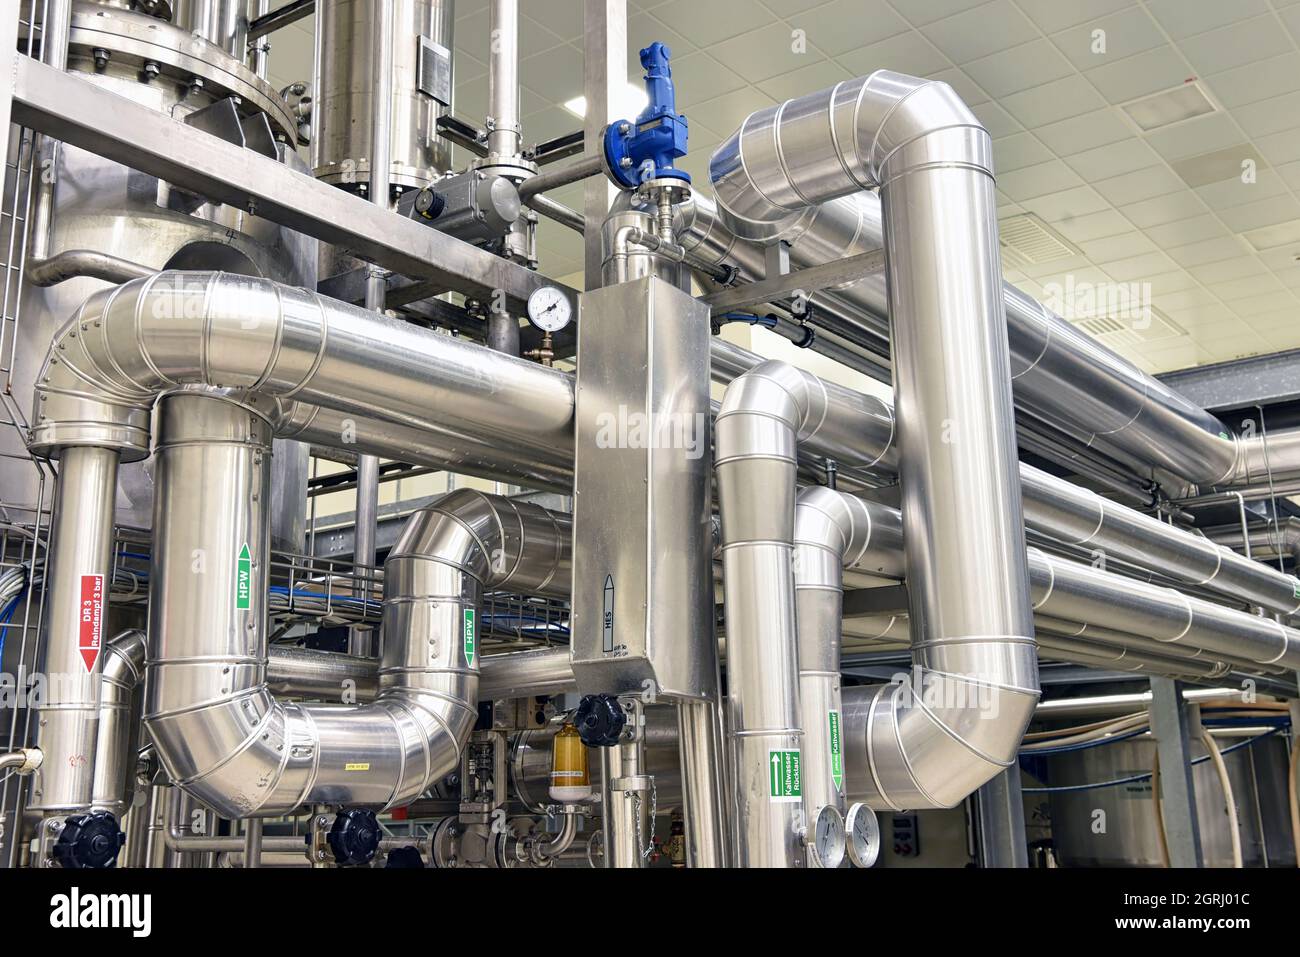 Interior of an industrial plant - pipelines, tank for storage Stock Photo